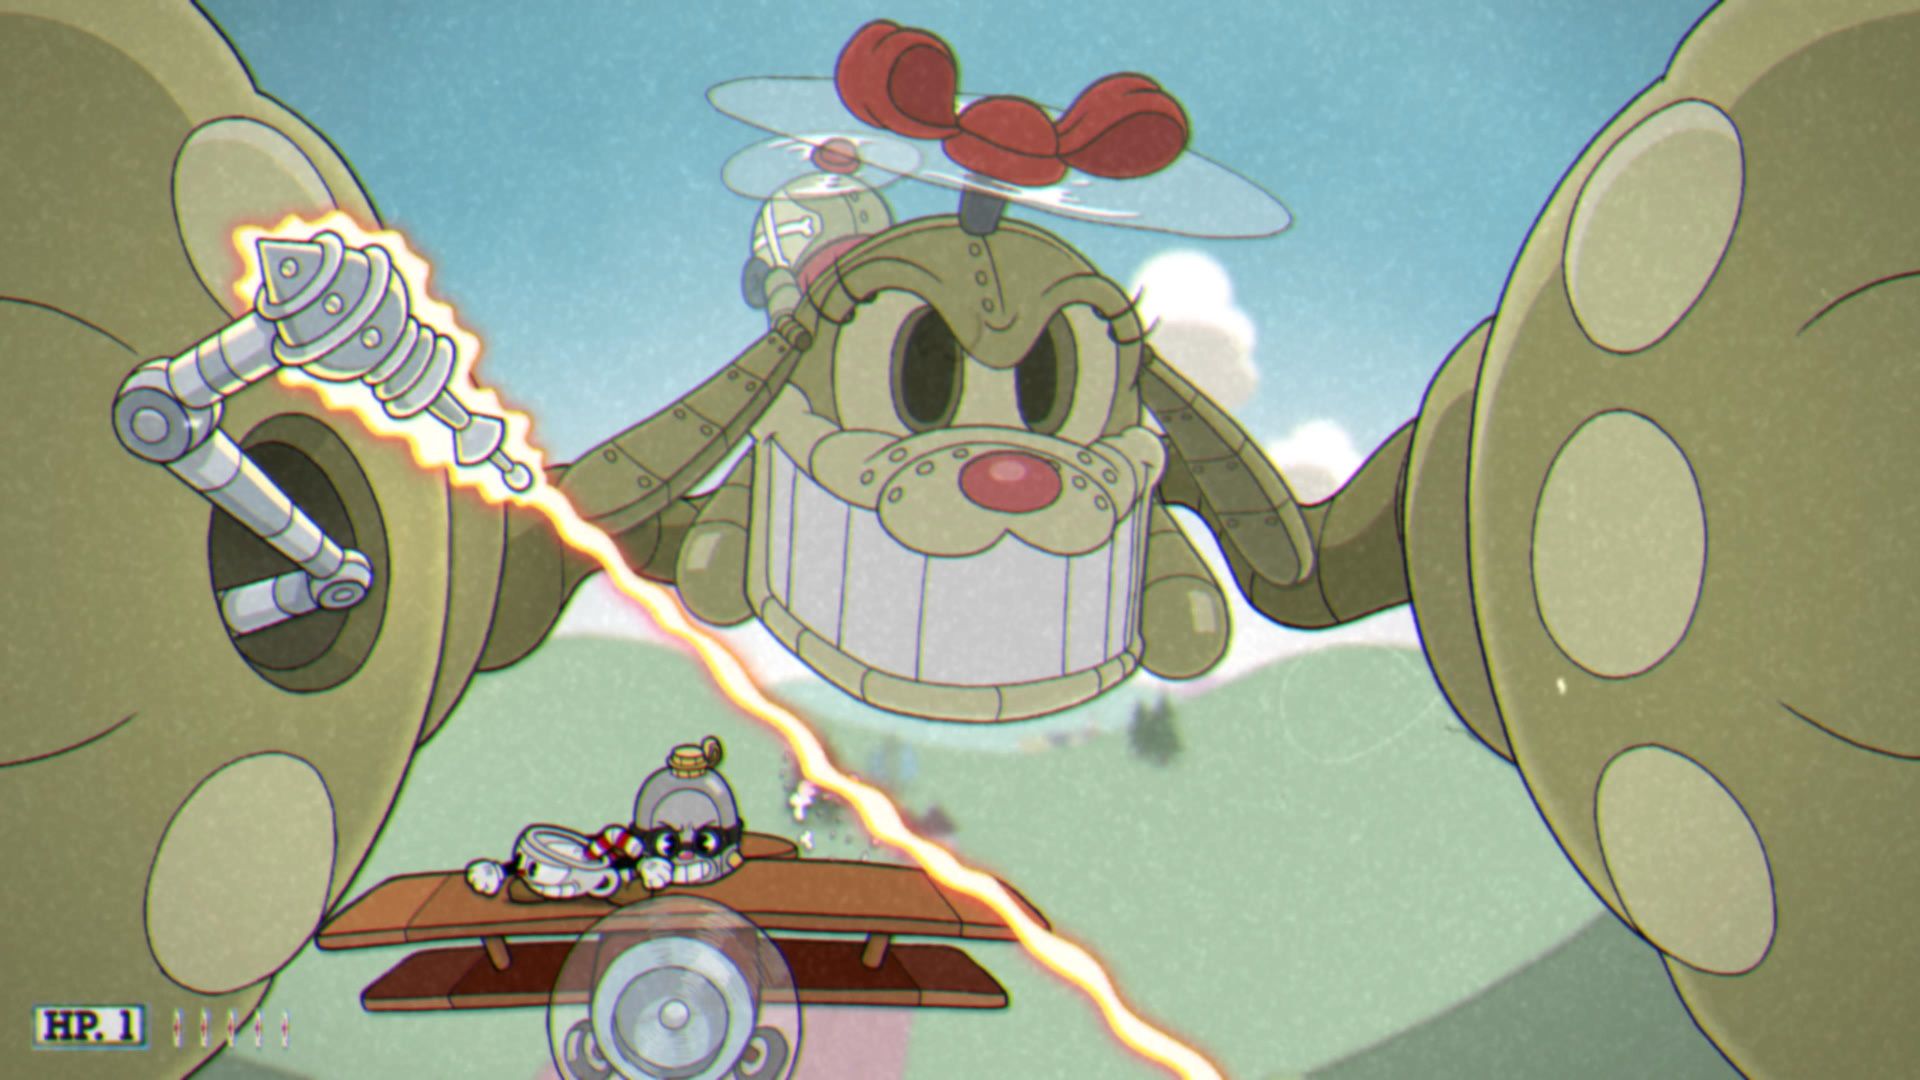 Cuphead The Delicious Course, The Howling Aces, Phase 3, Dodging the laser